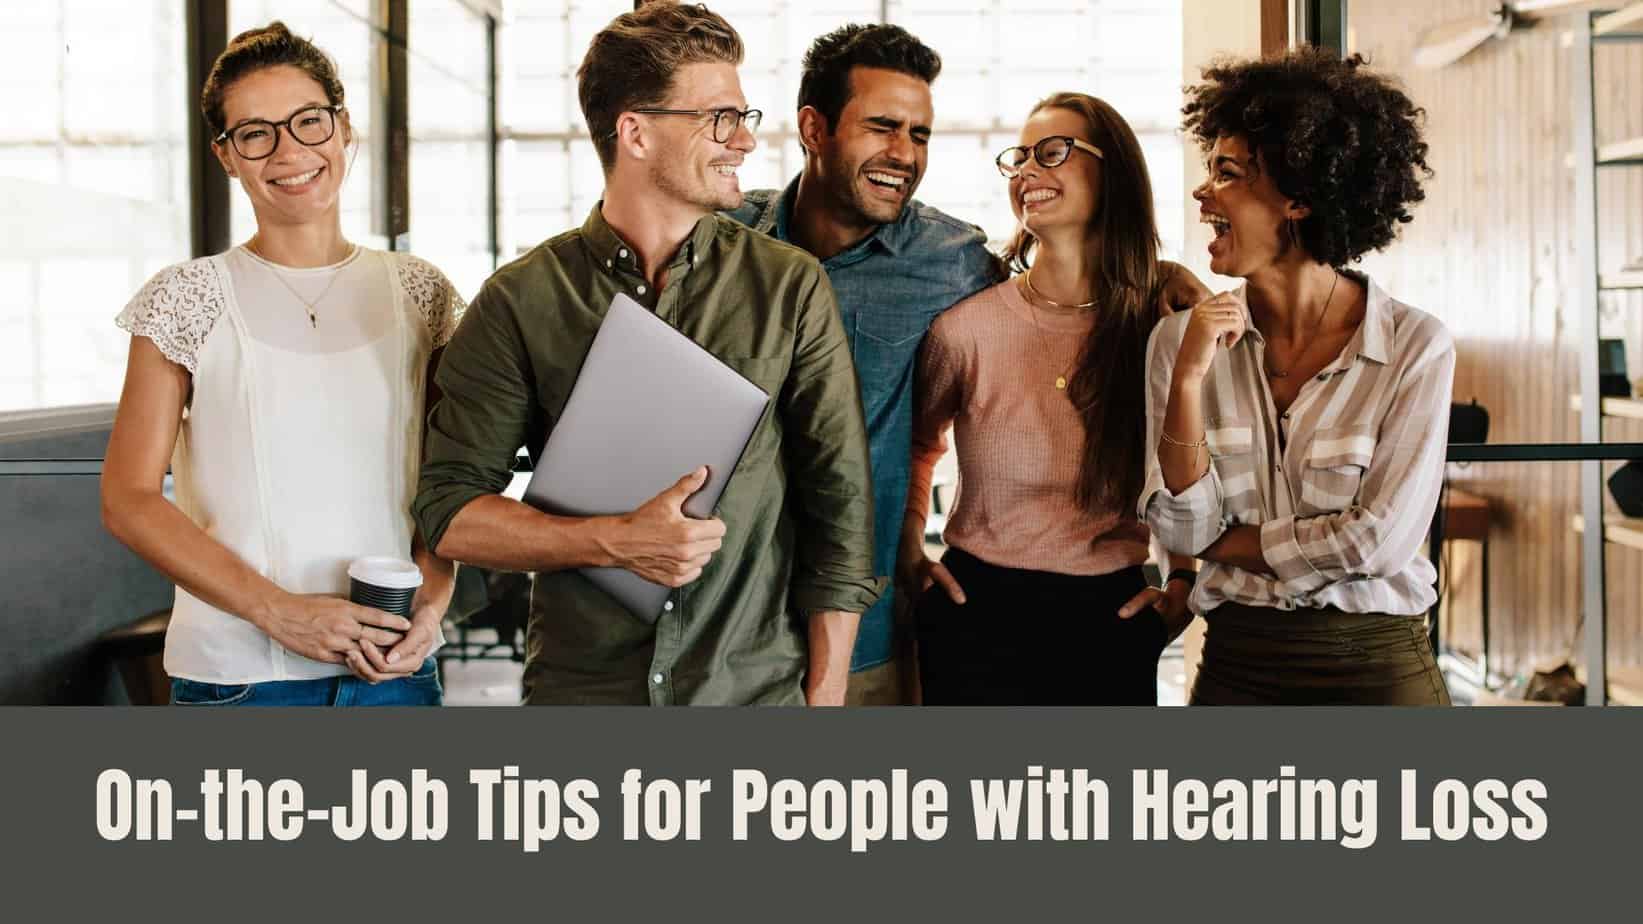 On-the-Job Tips for People with Hearing Loss